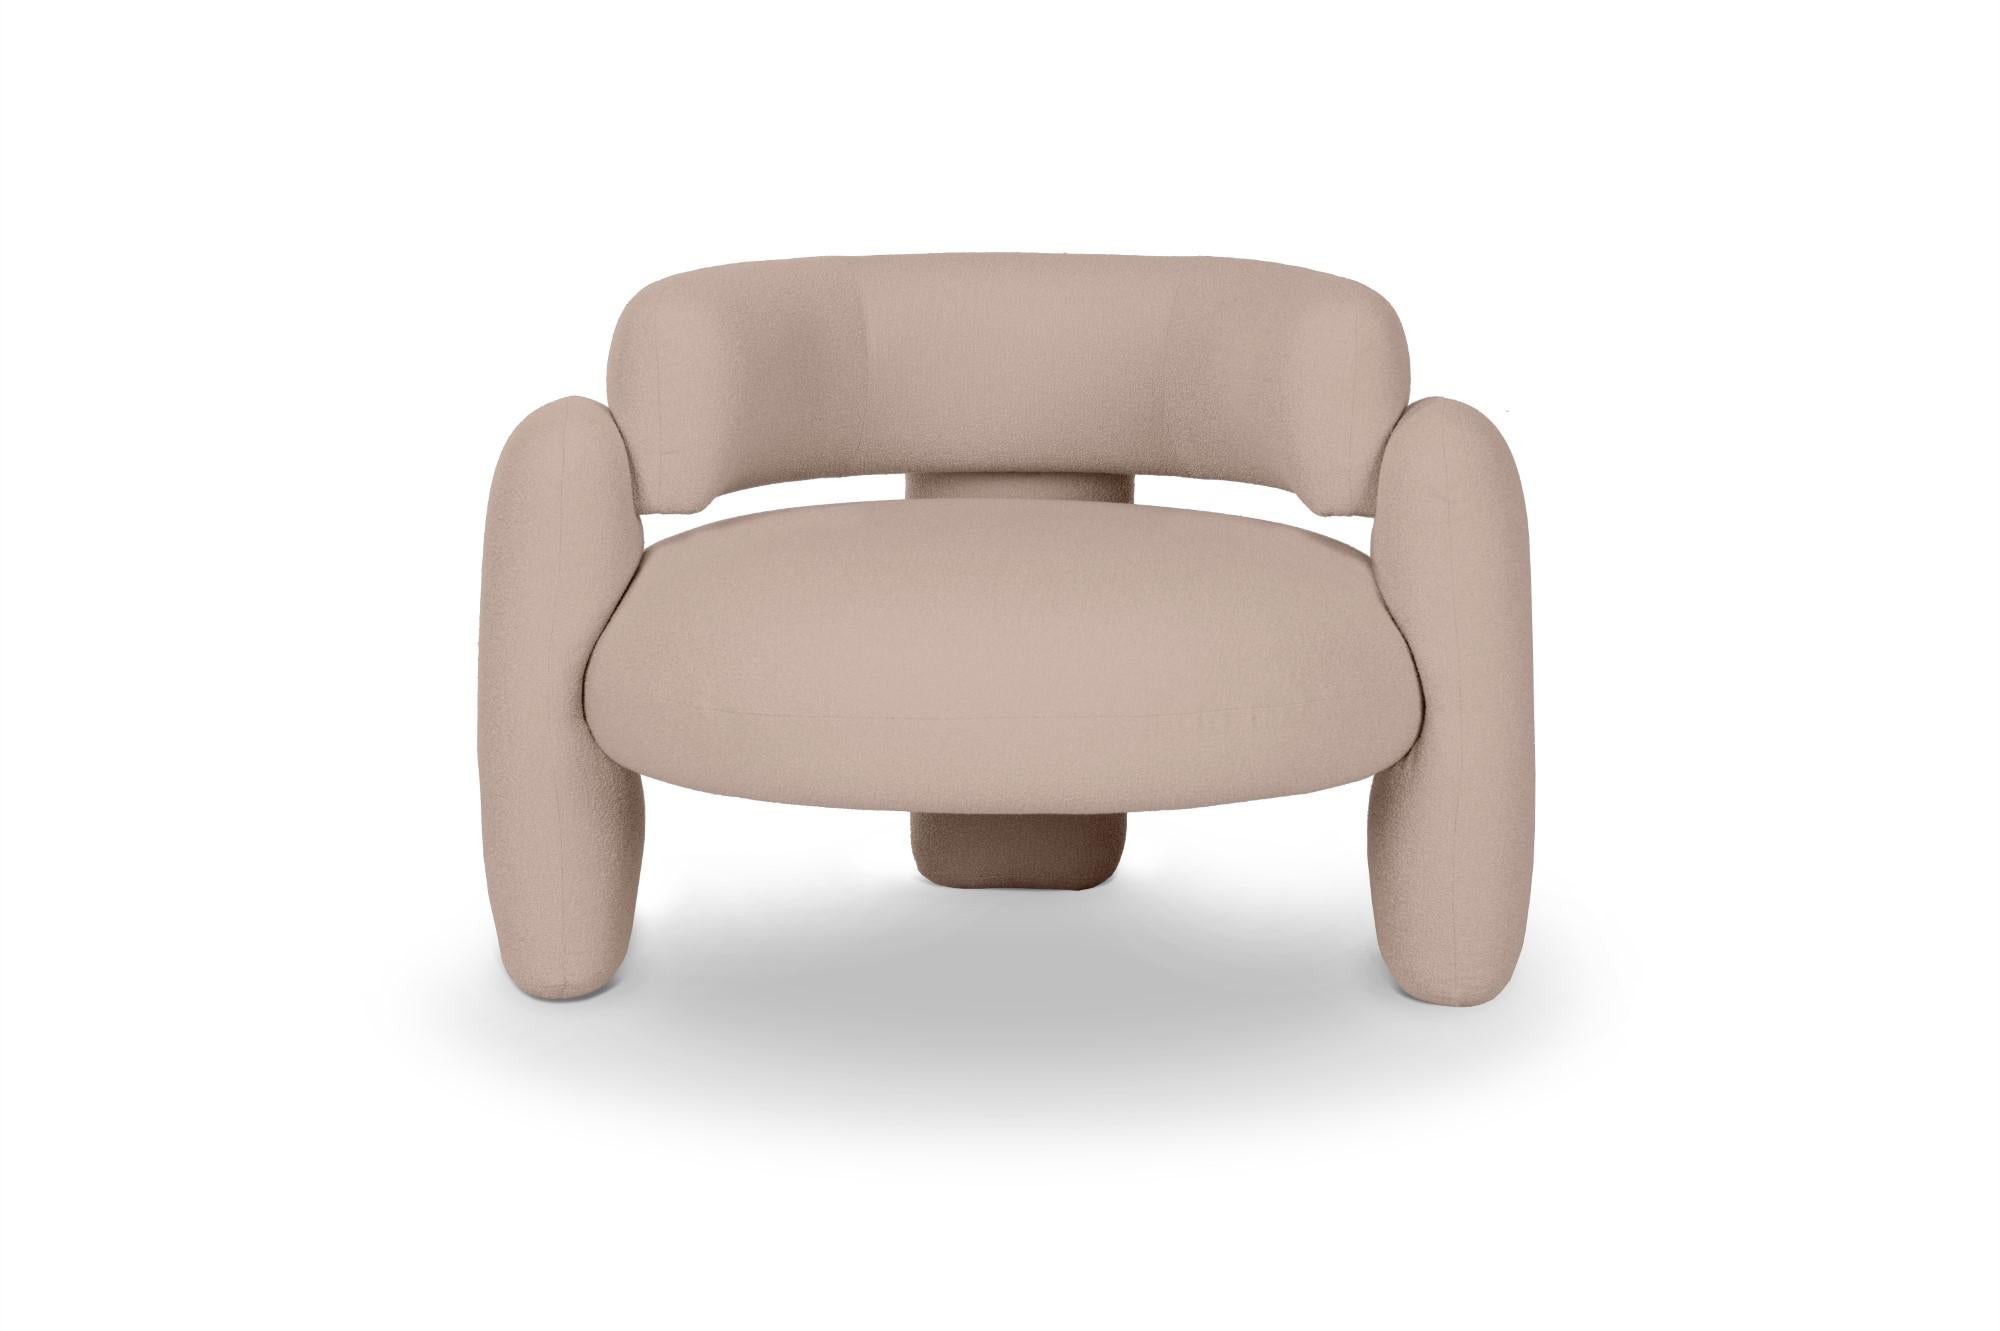 Embrace Lago Lin armchair by Royal Stranger
Dimensions: W 96 x D 85 x H 68 cm.
Different upholstery colors and finishes are available.
Materials: Upholstery.

Featuring an enfolding composition of geometrical shapes, the Embrace Armchair will